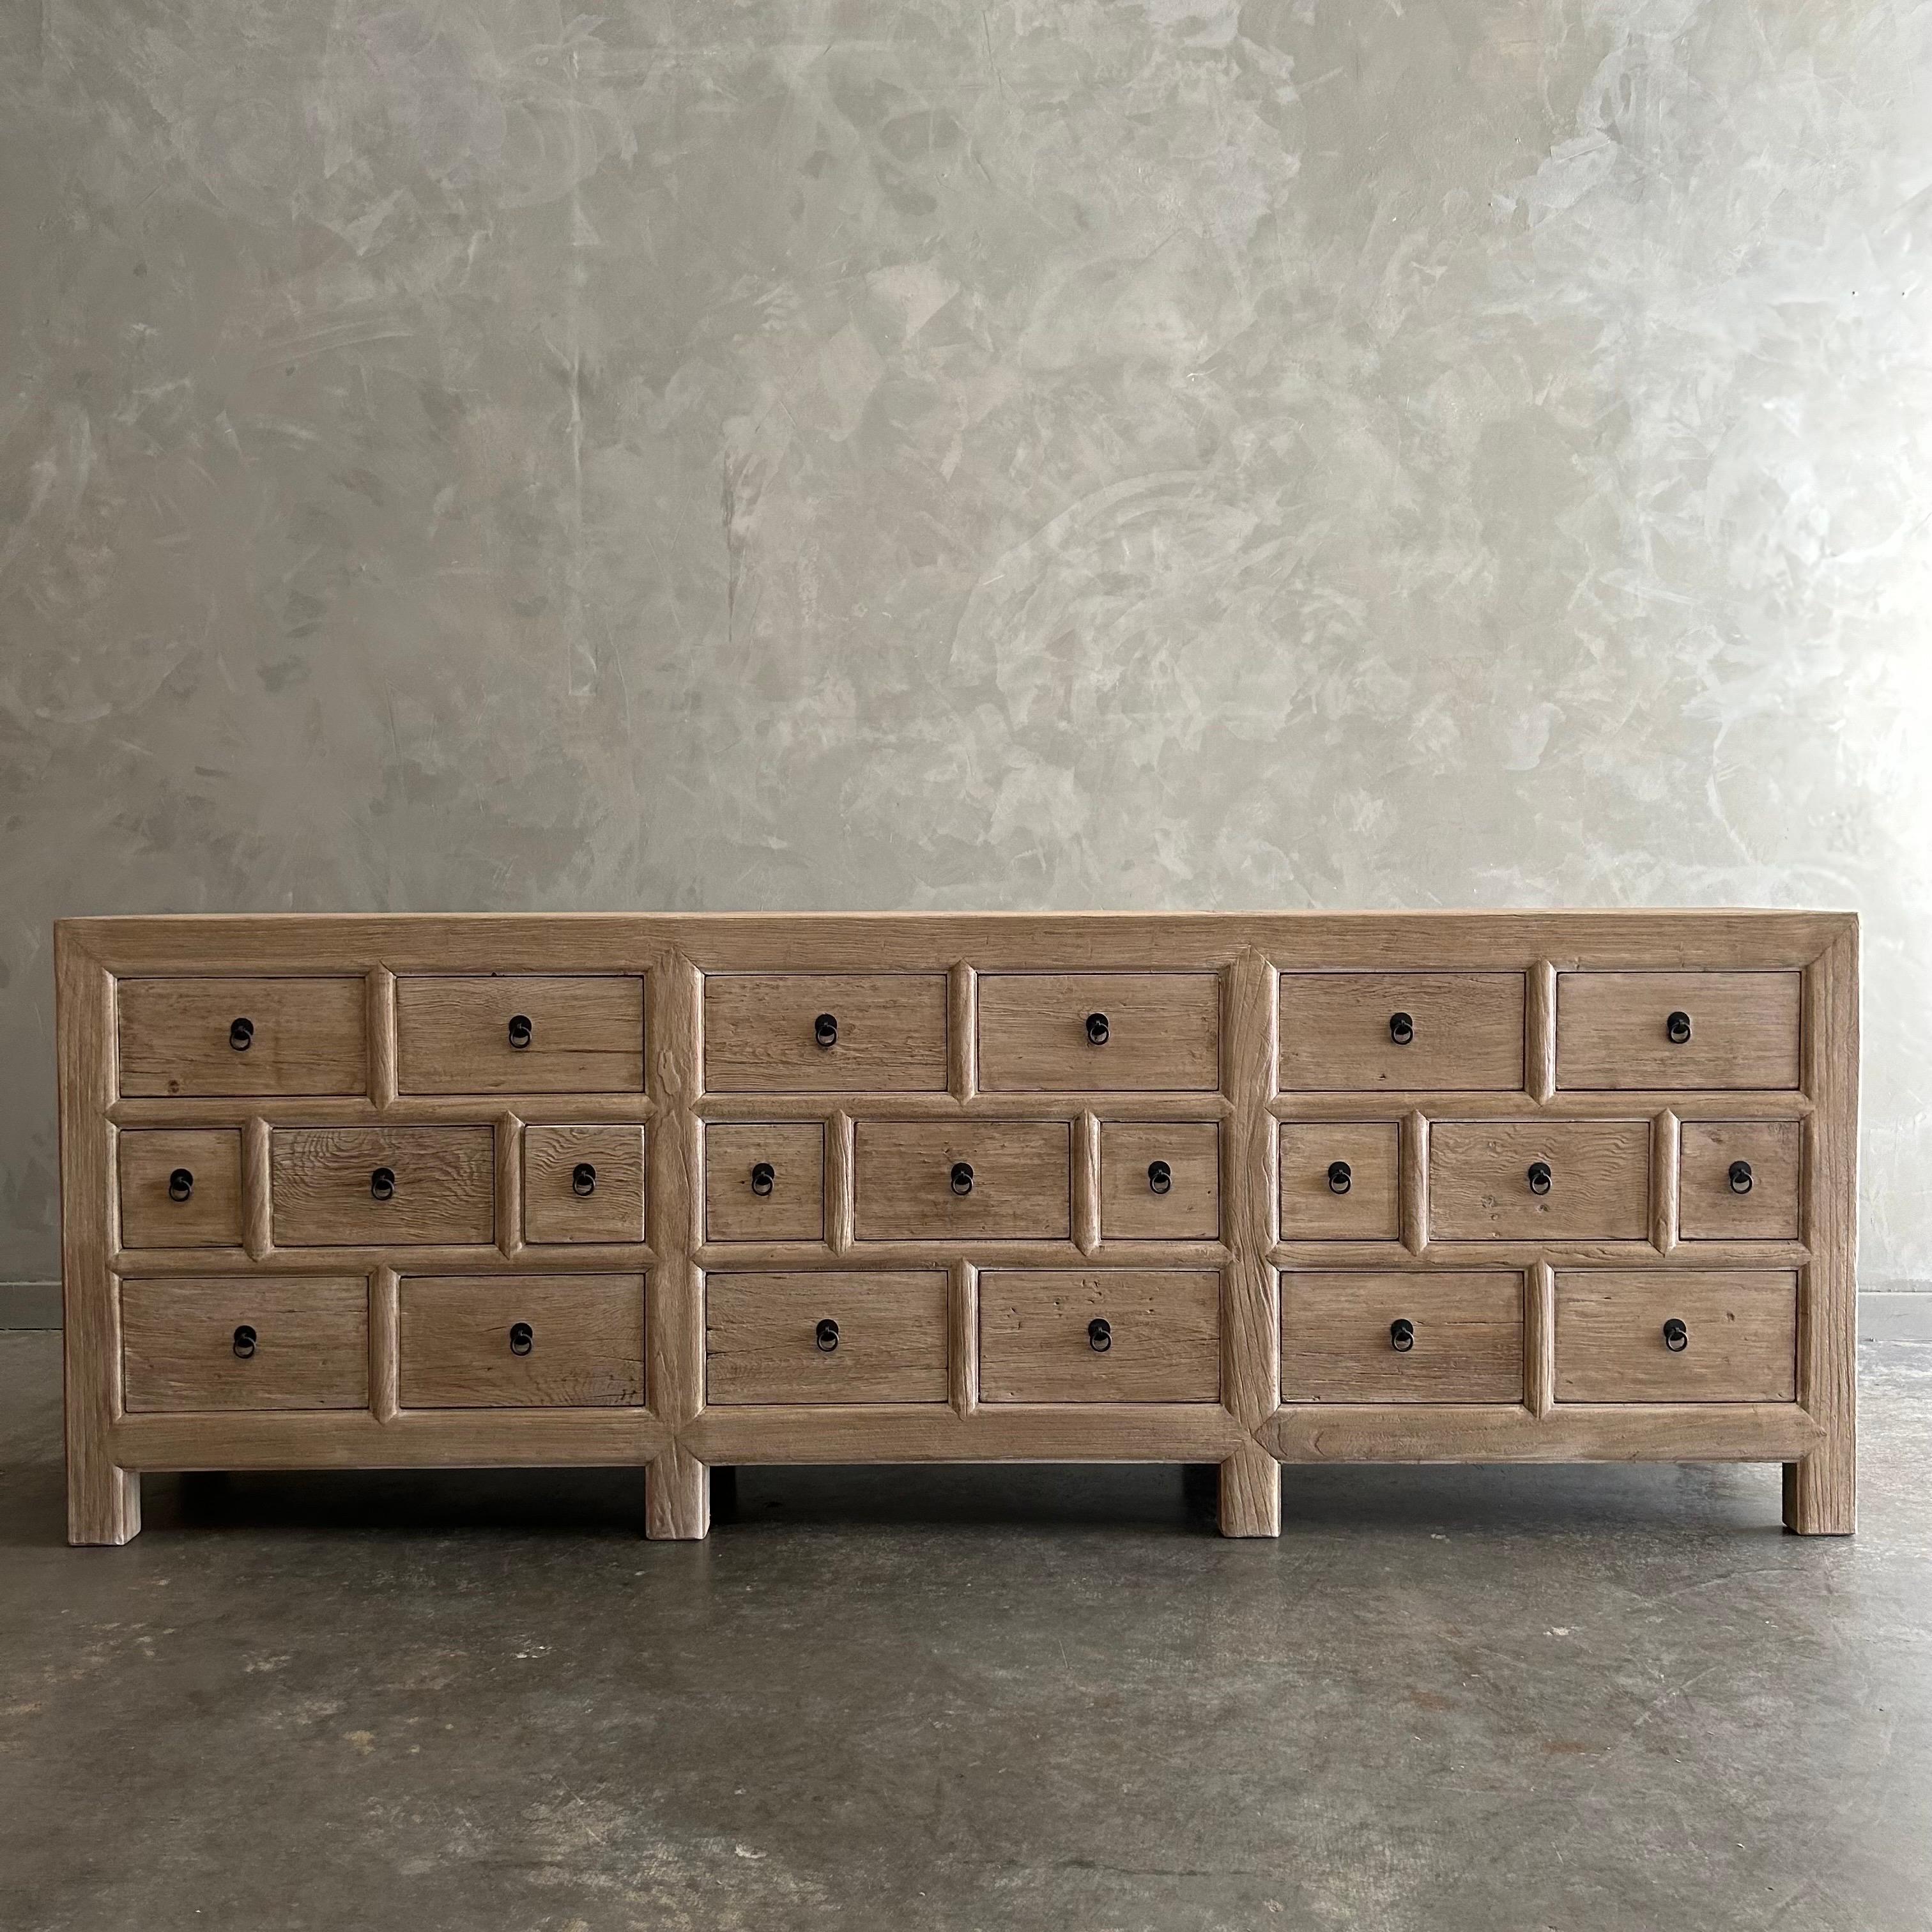 CARY SIDEBOARD IN NATURAL FINISH
Made from salvaged reclaimed timbers, this console is reminiscent of antique apothecary cabinets. Featuring 21 drawers for ample storage and a distinctive weathered finish, this rustic sideboard adds a unique touch